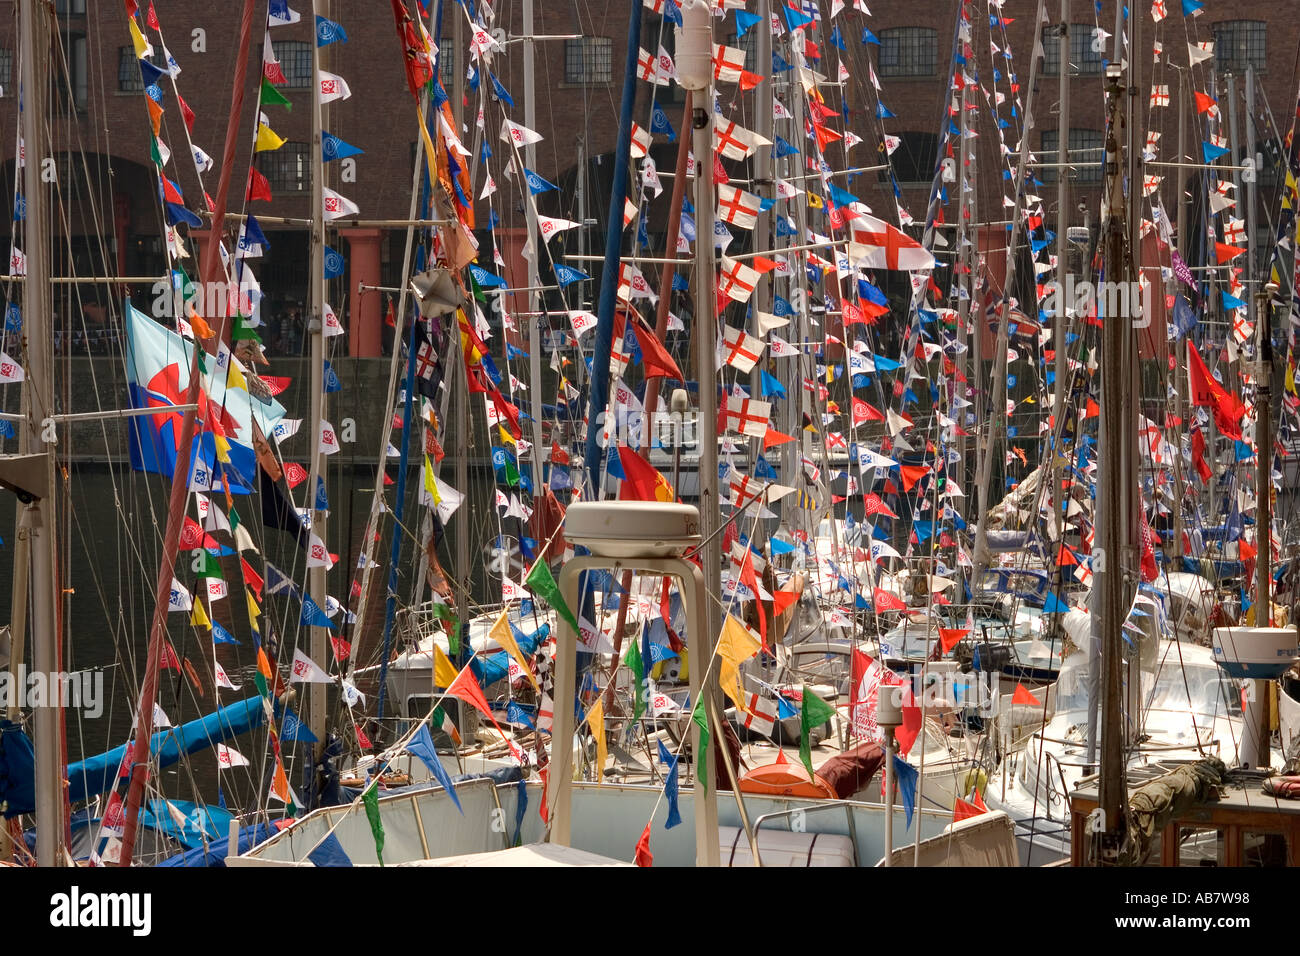 UK, Merseyside Liverpool Mersey River Festival flags and bunting decorating boats in Albert Dock Stock Photo